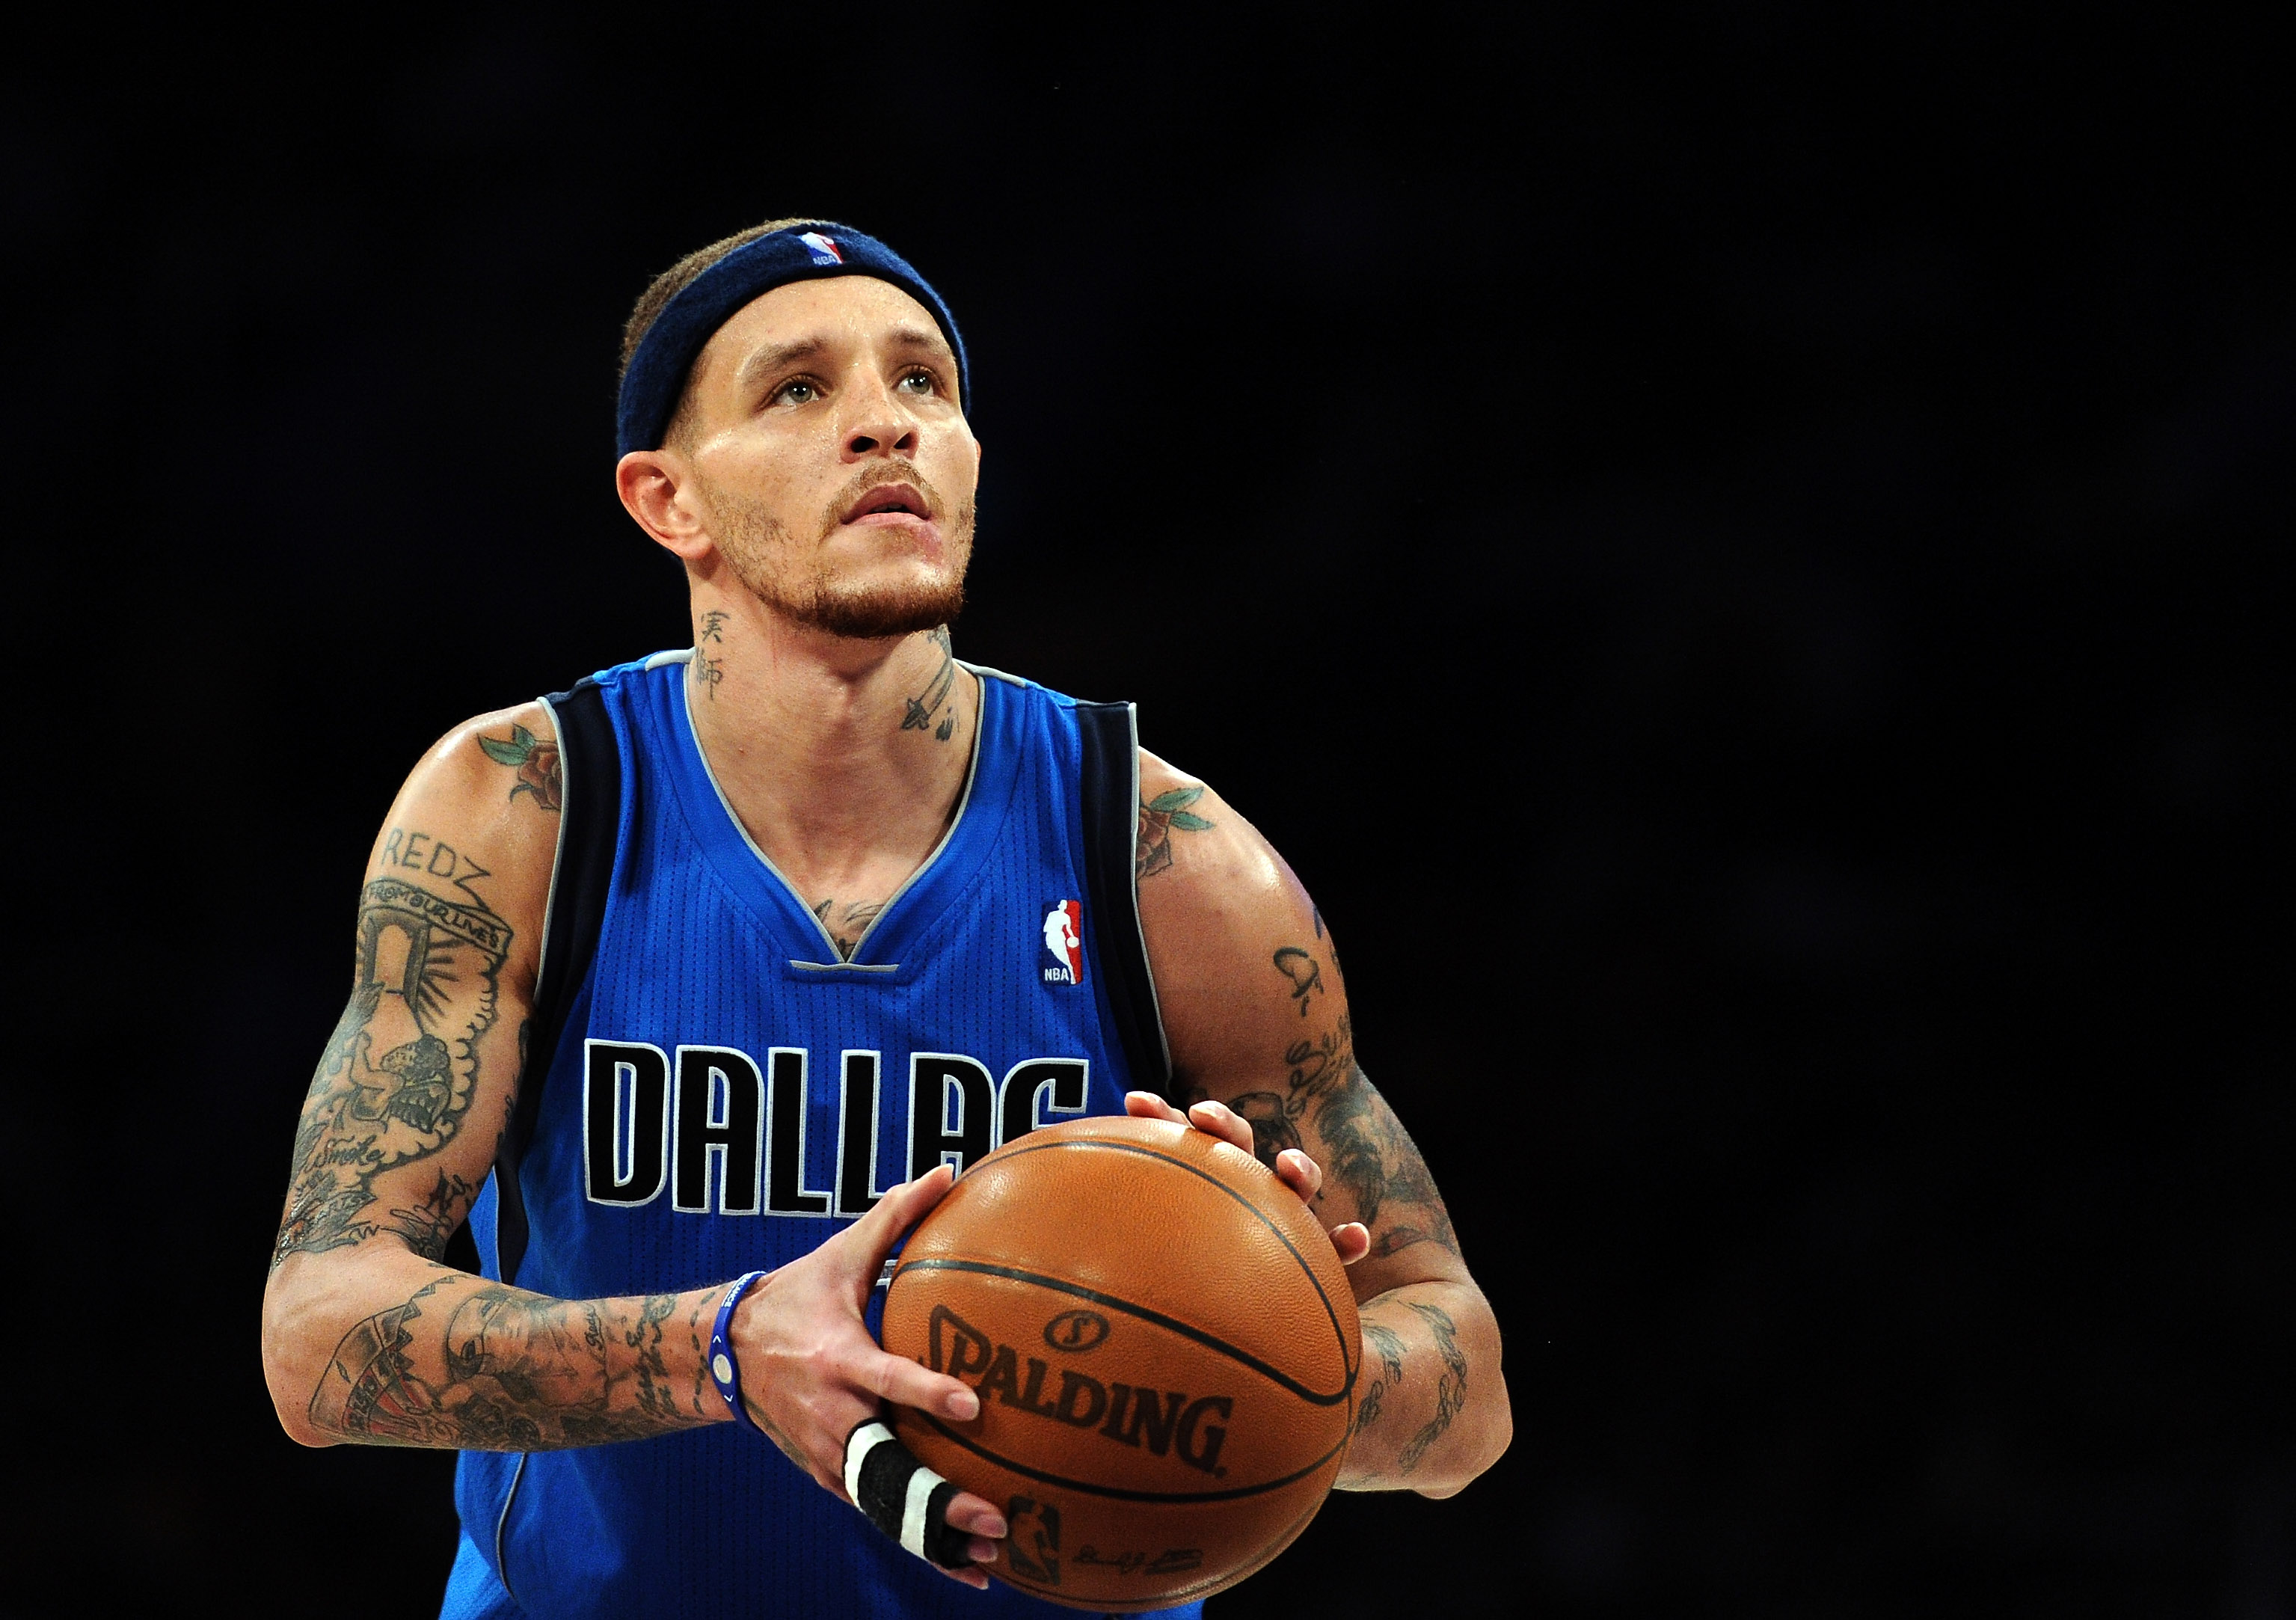 Delonte West is pictured as he shoots a free throw during a 112-108 loss to the Los Angeles Lakers at Staples Center on April 15, 2012, in Los Angeles, California | Source: Getty Images